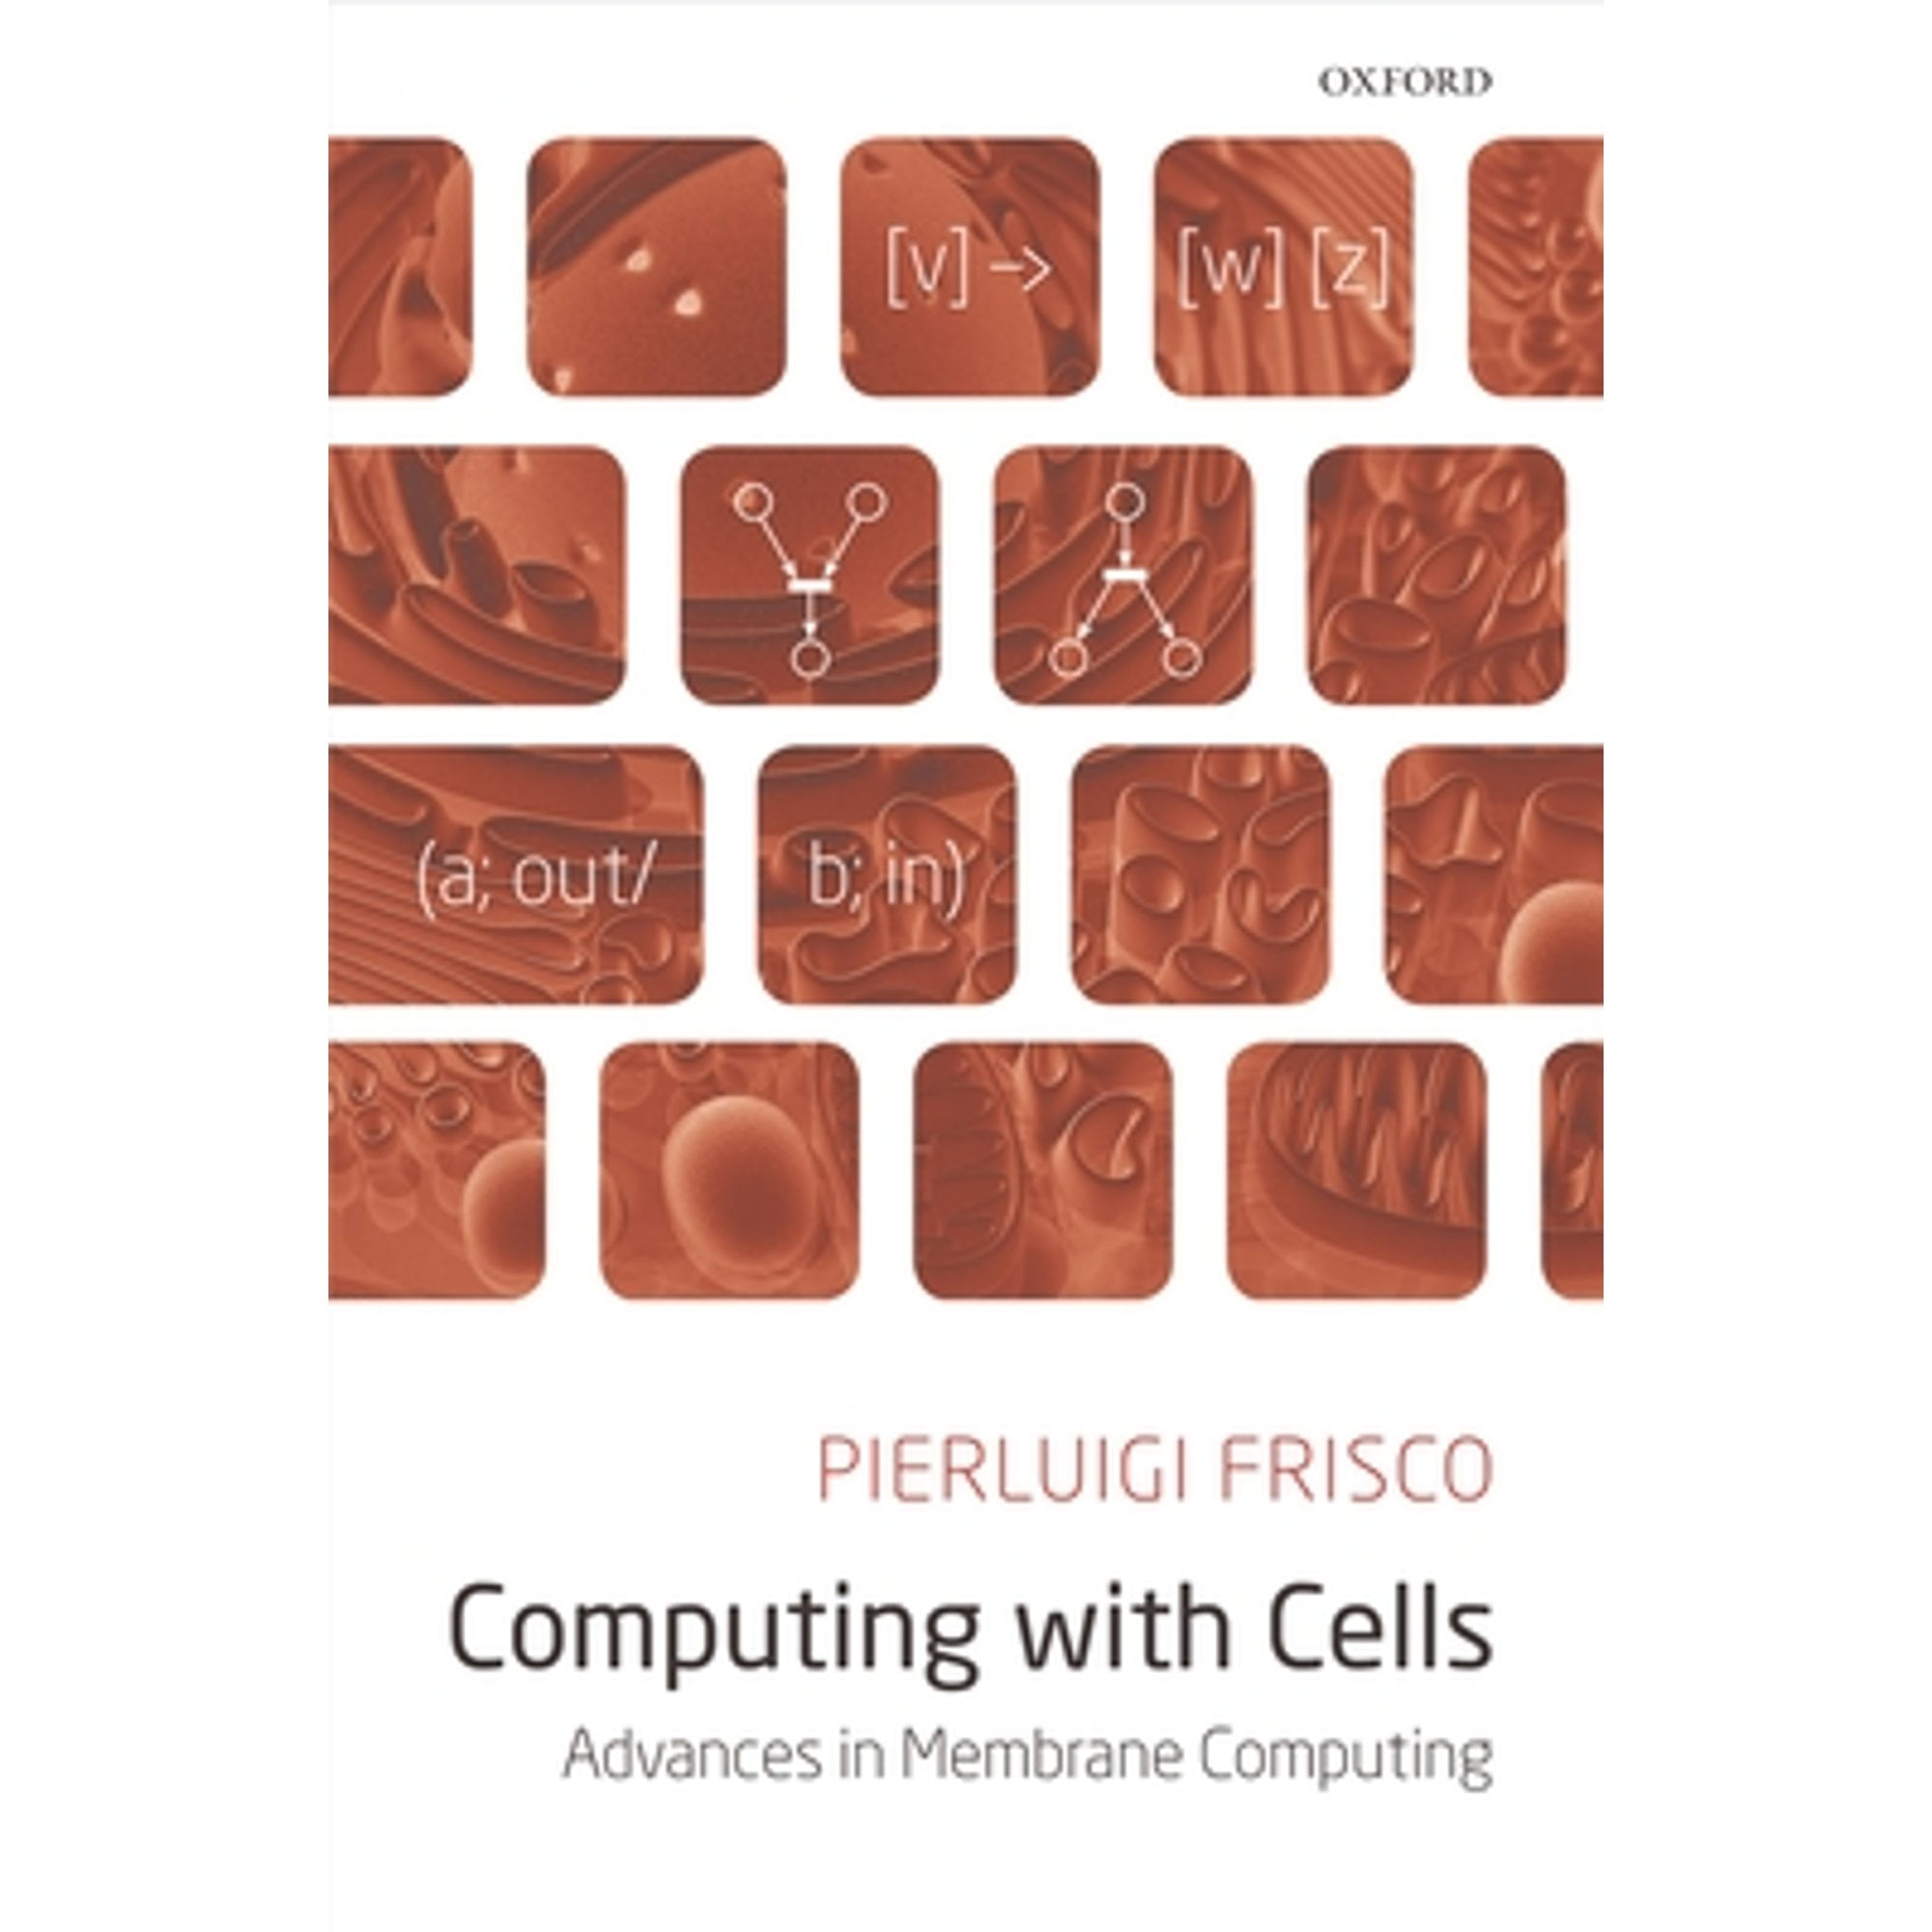 Pre-Owned Computing with Cells: Advances in Membrane Computing (Hardcover 9780199542864) by Pierluigi Frisco